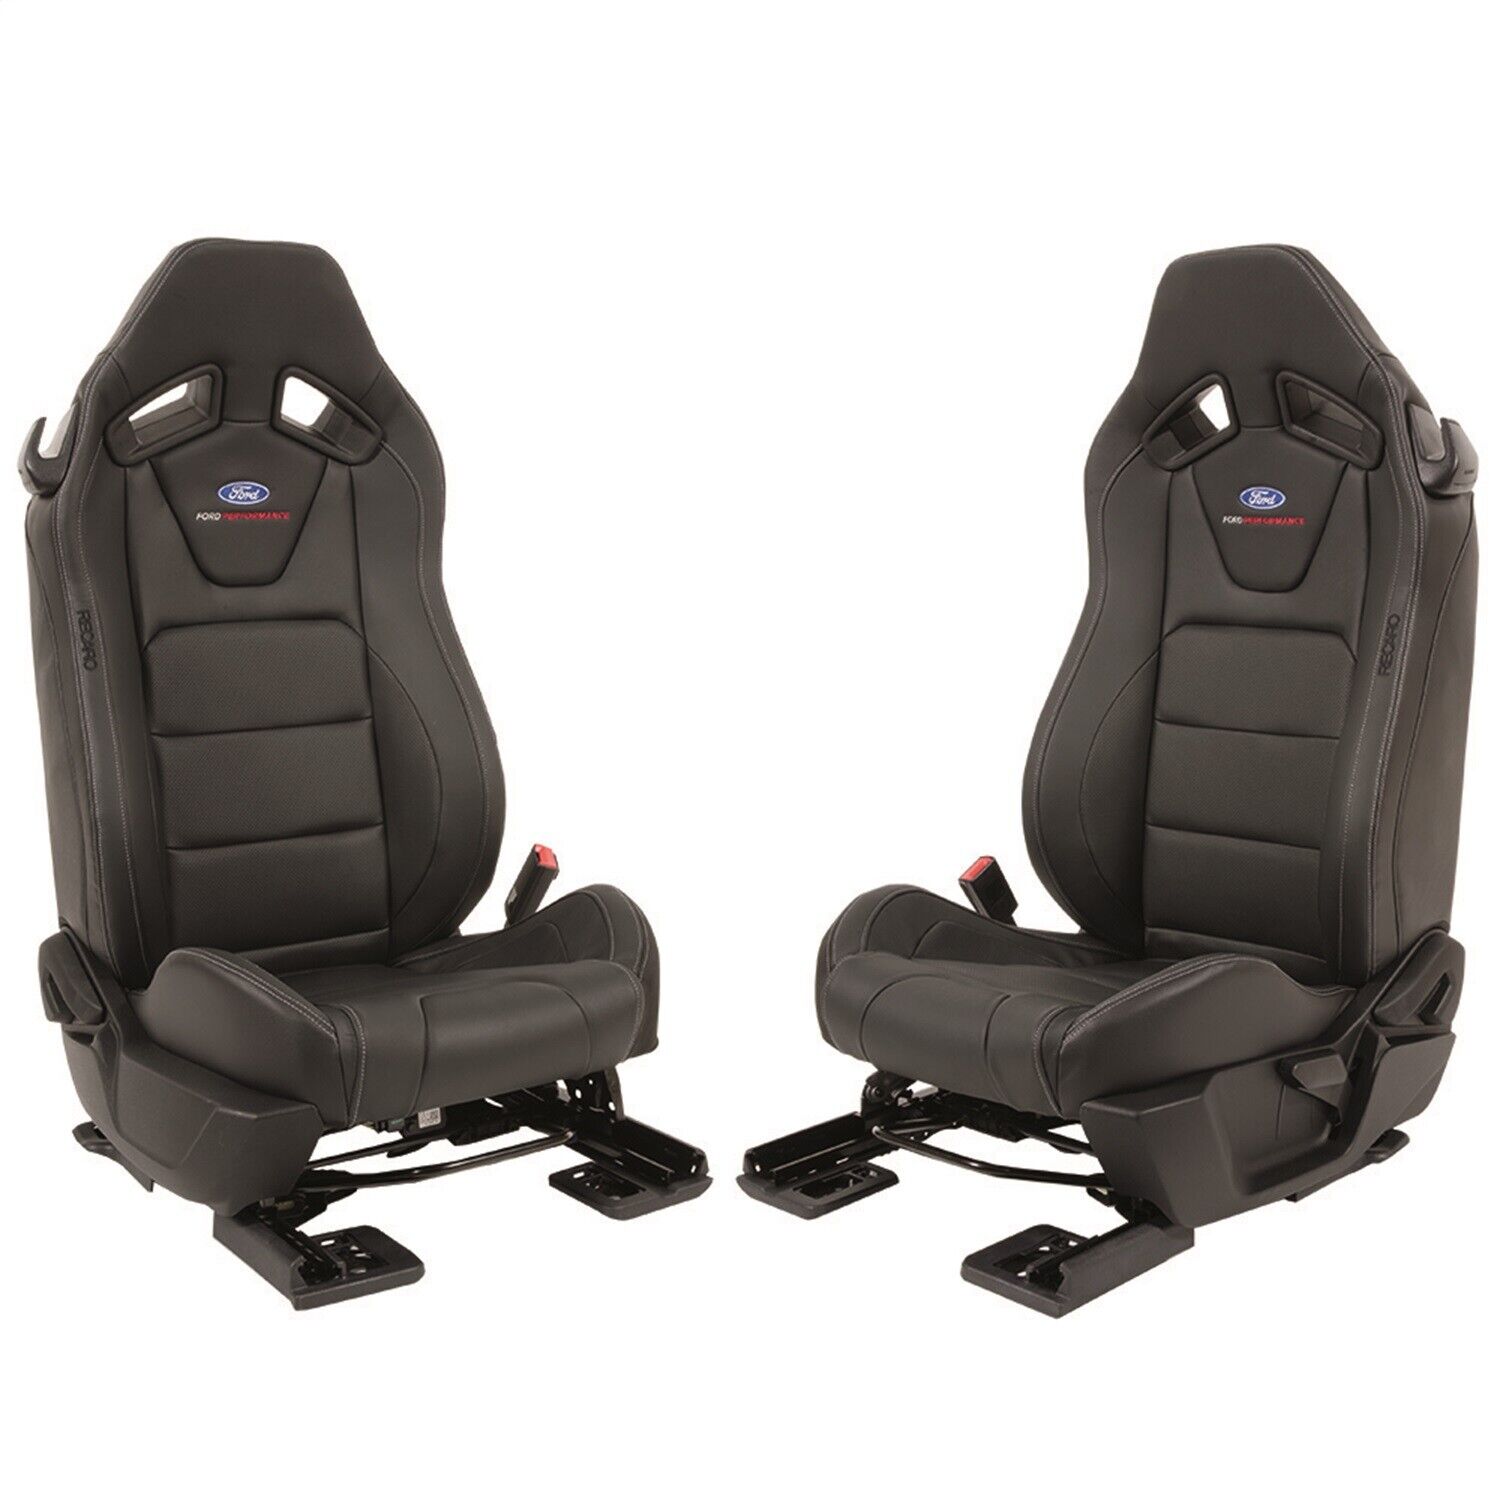 Ford Performance Parts M-63660005-MF Ford Performance by Recaro Seat Set